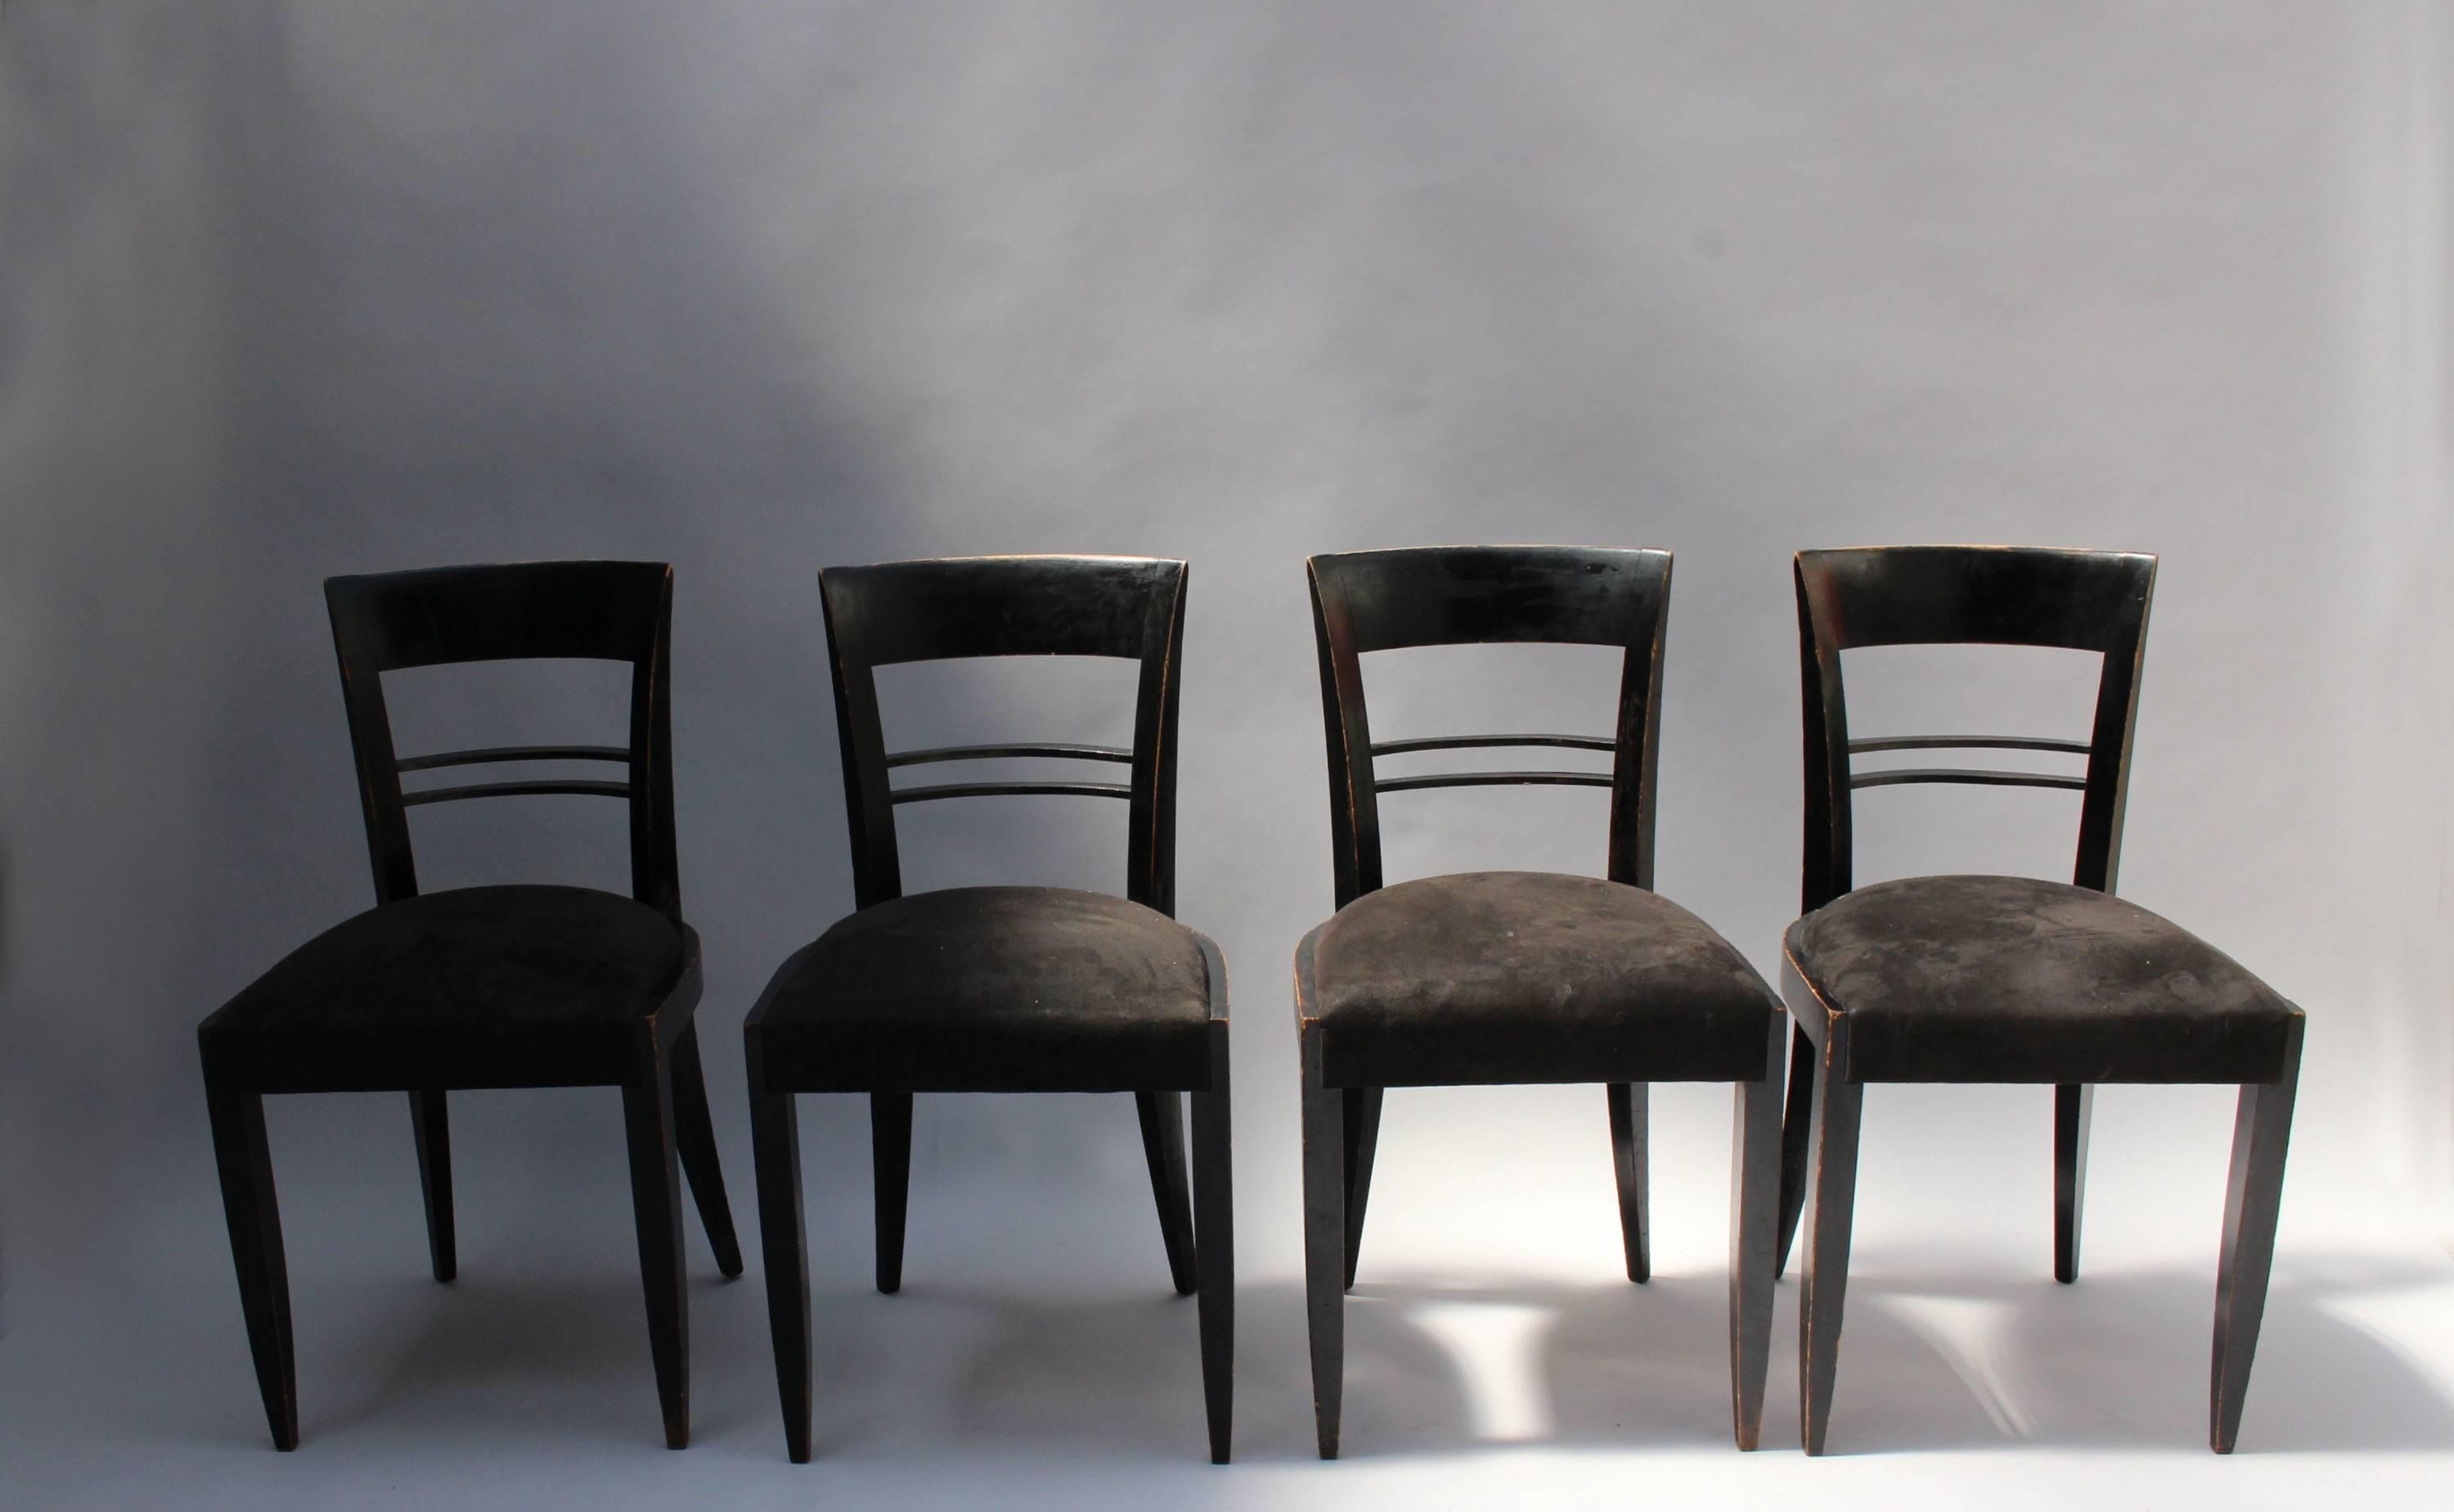 A set of six French Art Deco black lacquered dining chairs (four side and two armchairs) attributed to Adnet.